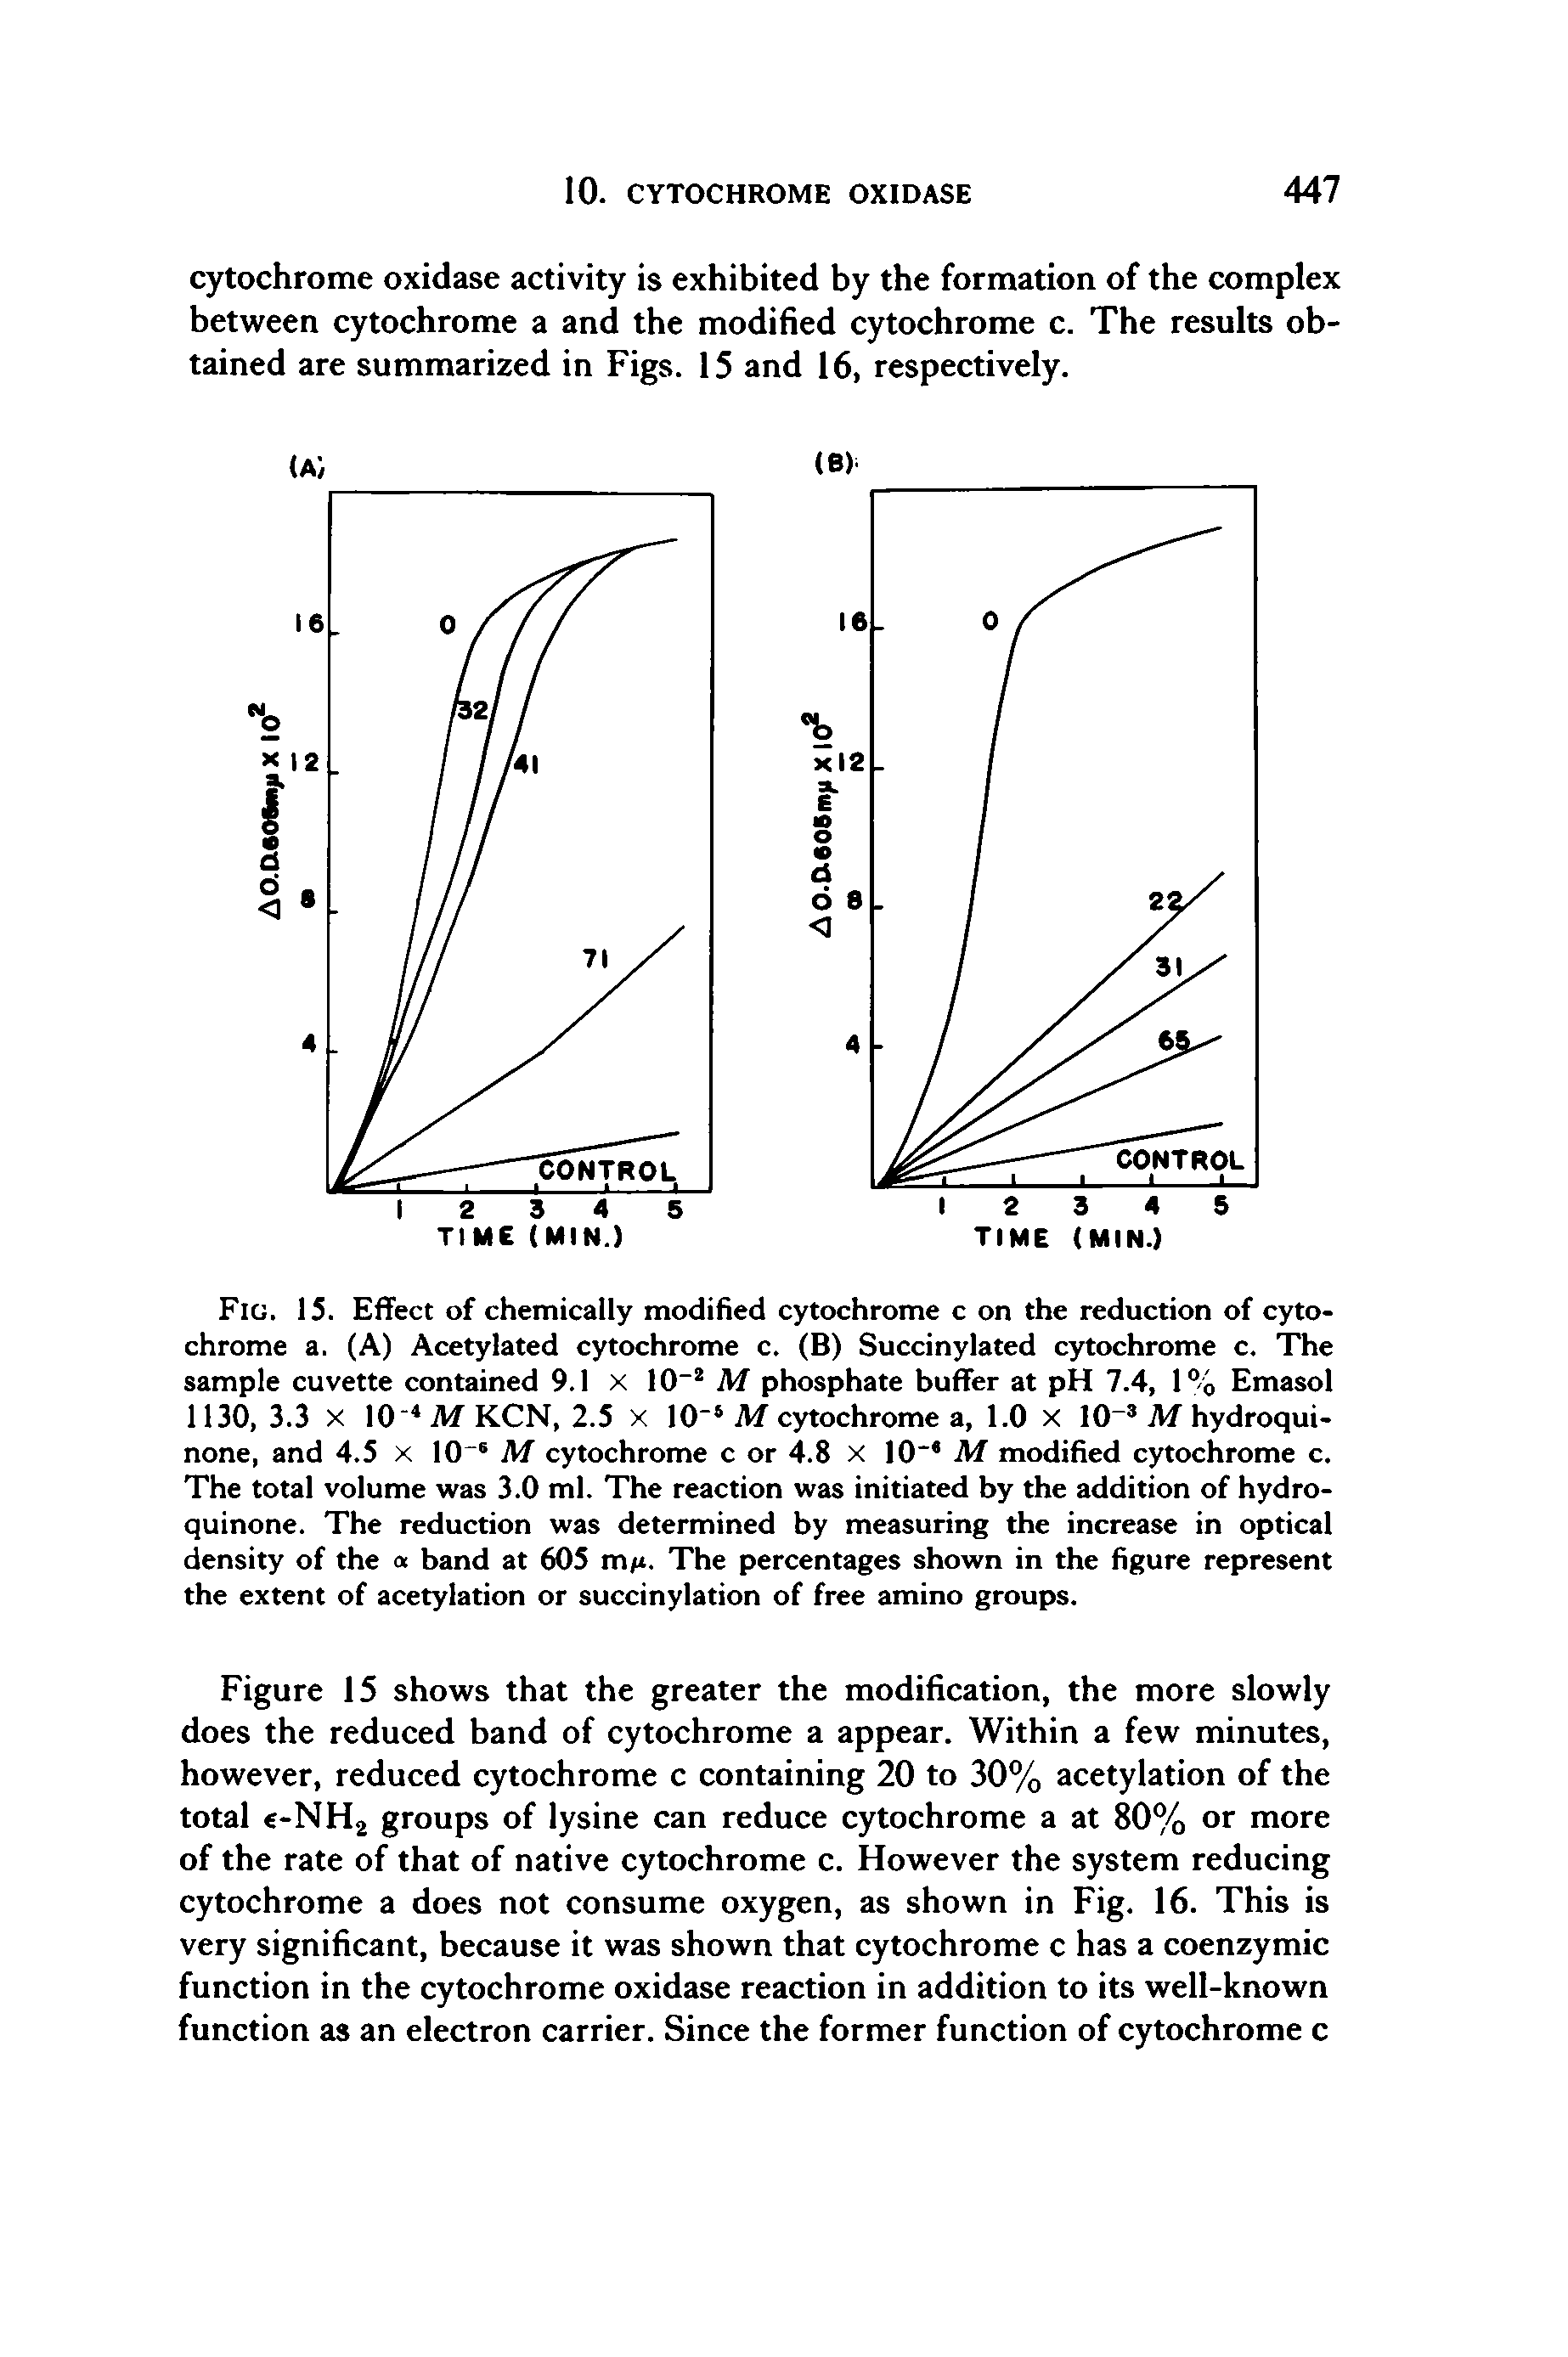 Fig. 15. Effect of chemically modified cytochrome c on the reduction of cytochrome a. (A) Acetylated cytochrome c. (B) Succinylated cytochrome c. The sample cuvette contained 9.1 x 10" M phosphate buffer at pH 7.4, 1% Emasol 1130, 3.3 X I0 MKCN, 2.5 x I O M cytochrome a, 1.0 x 10 M hydroqui-none, and 4.5 x I0" M cytochrome c or 4.8 x 10 M modified cytochrome c. The total volume was 3.0 ml. The reaction was initiated by the addition of hydro-quinone. The reduction was determined by measuring the increase in optical density of the <x band at 605 m/i. The percentages shown in the figure represent the extent of acetylation or succinylation of free amino groups.